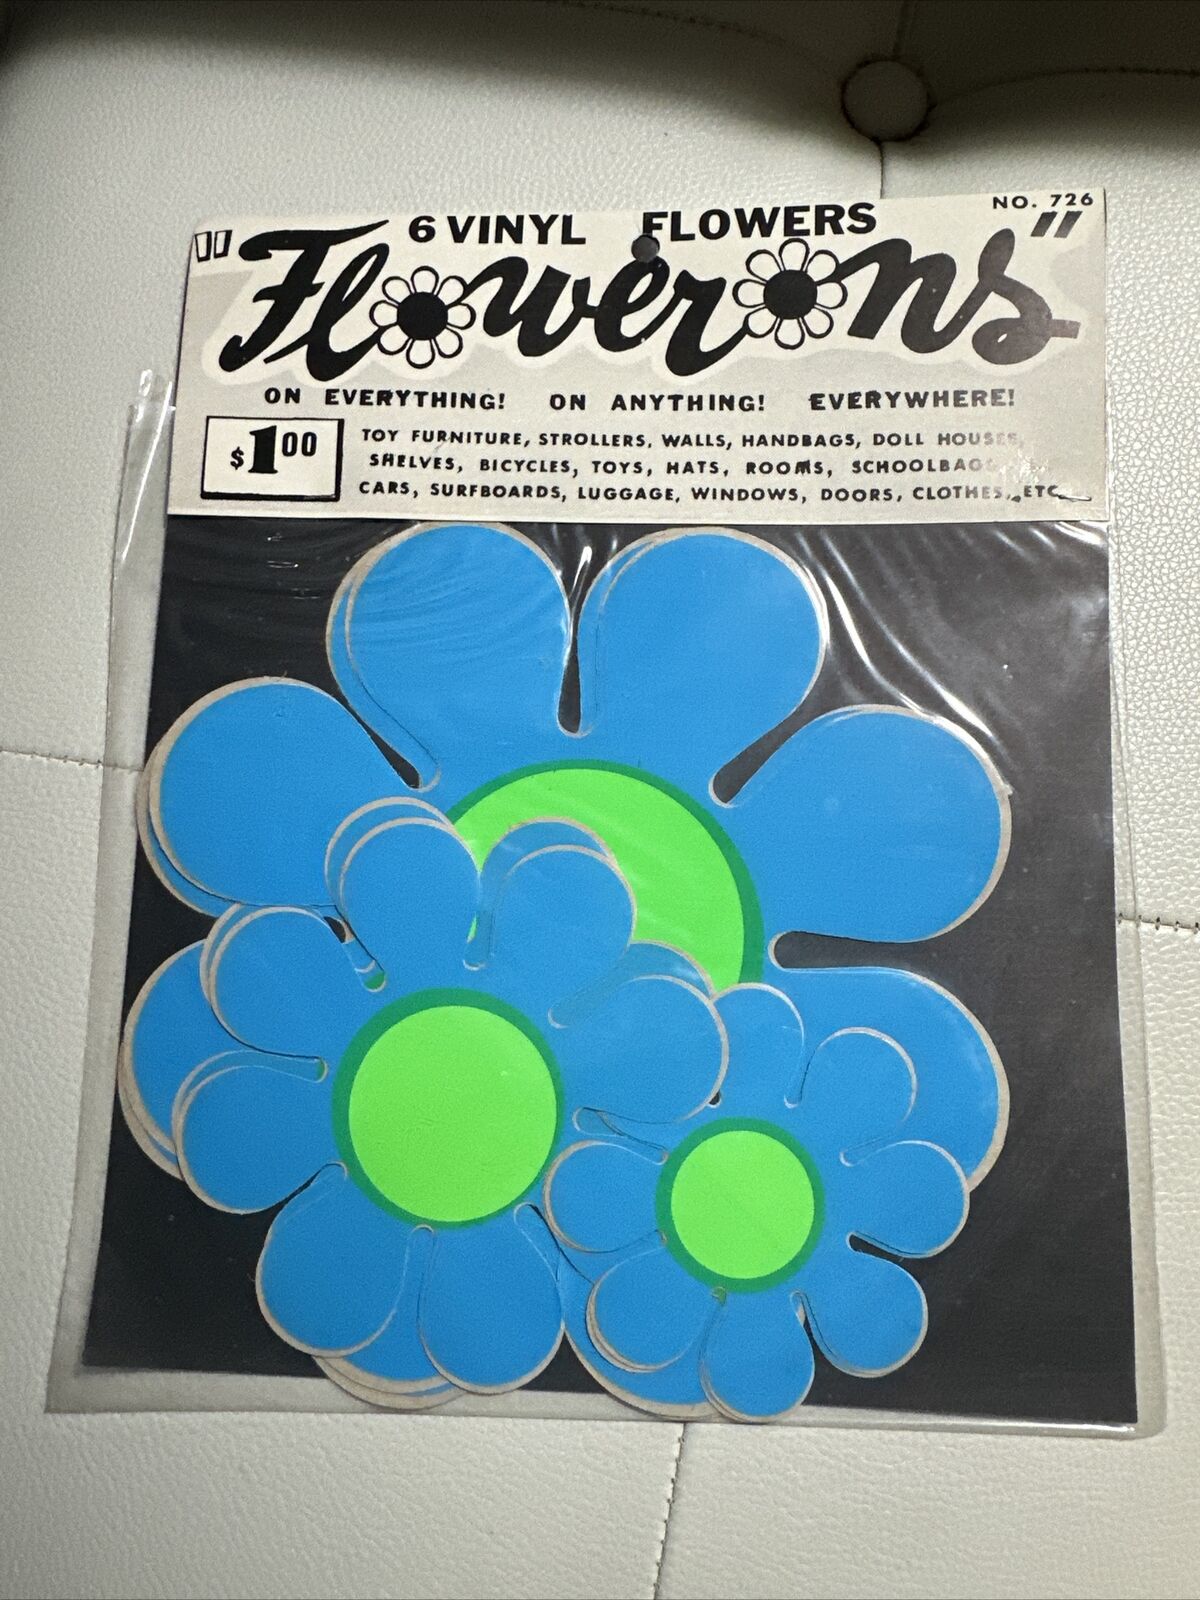 Rare Vintage 80's Or 70’s Stickers Blue Green Flower Vinyl Pack Sheet Groovy